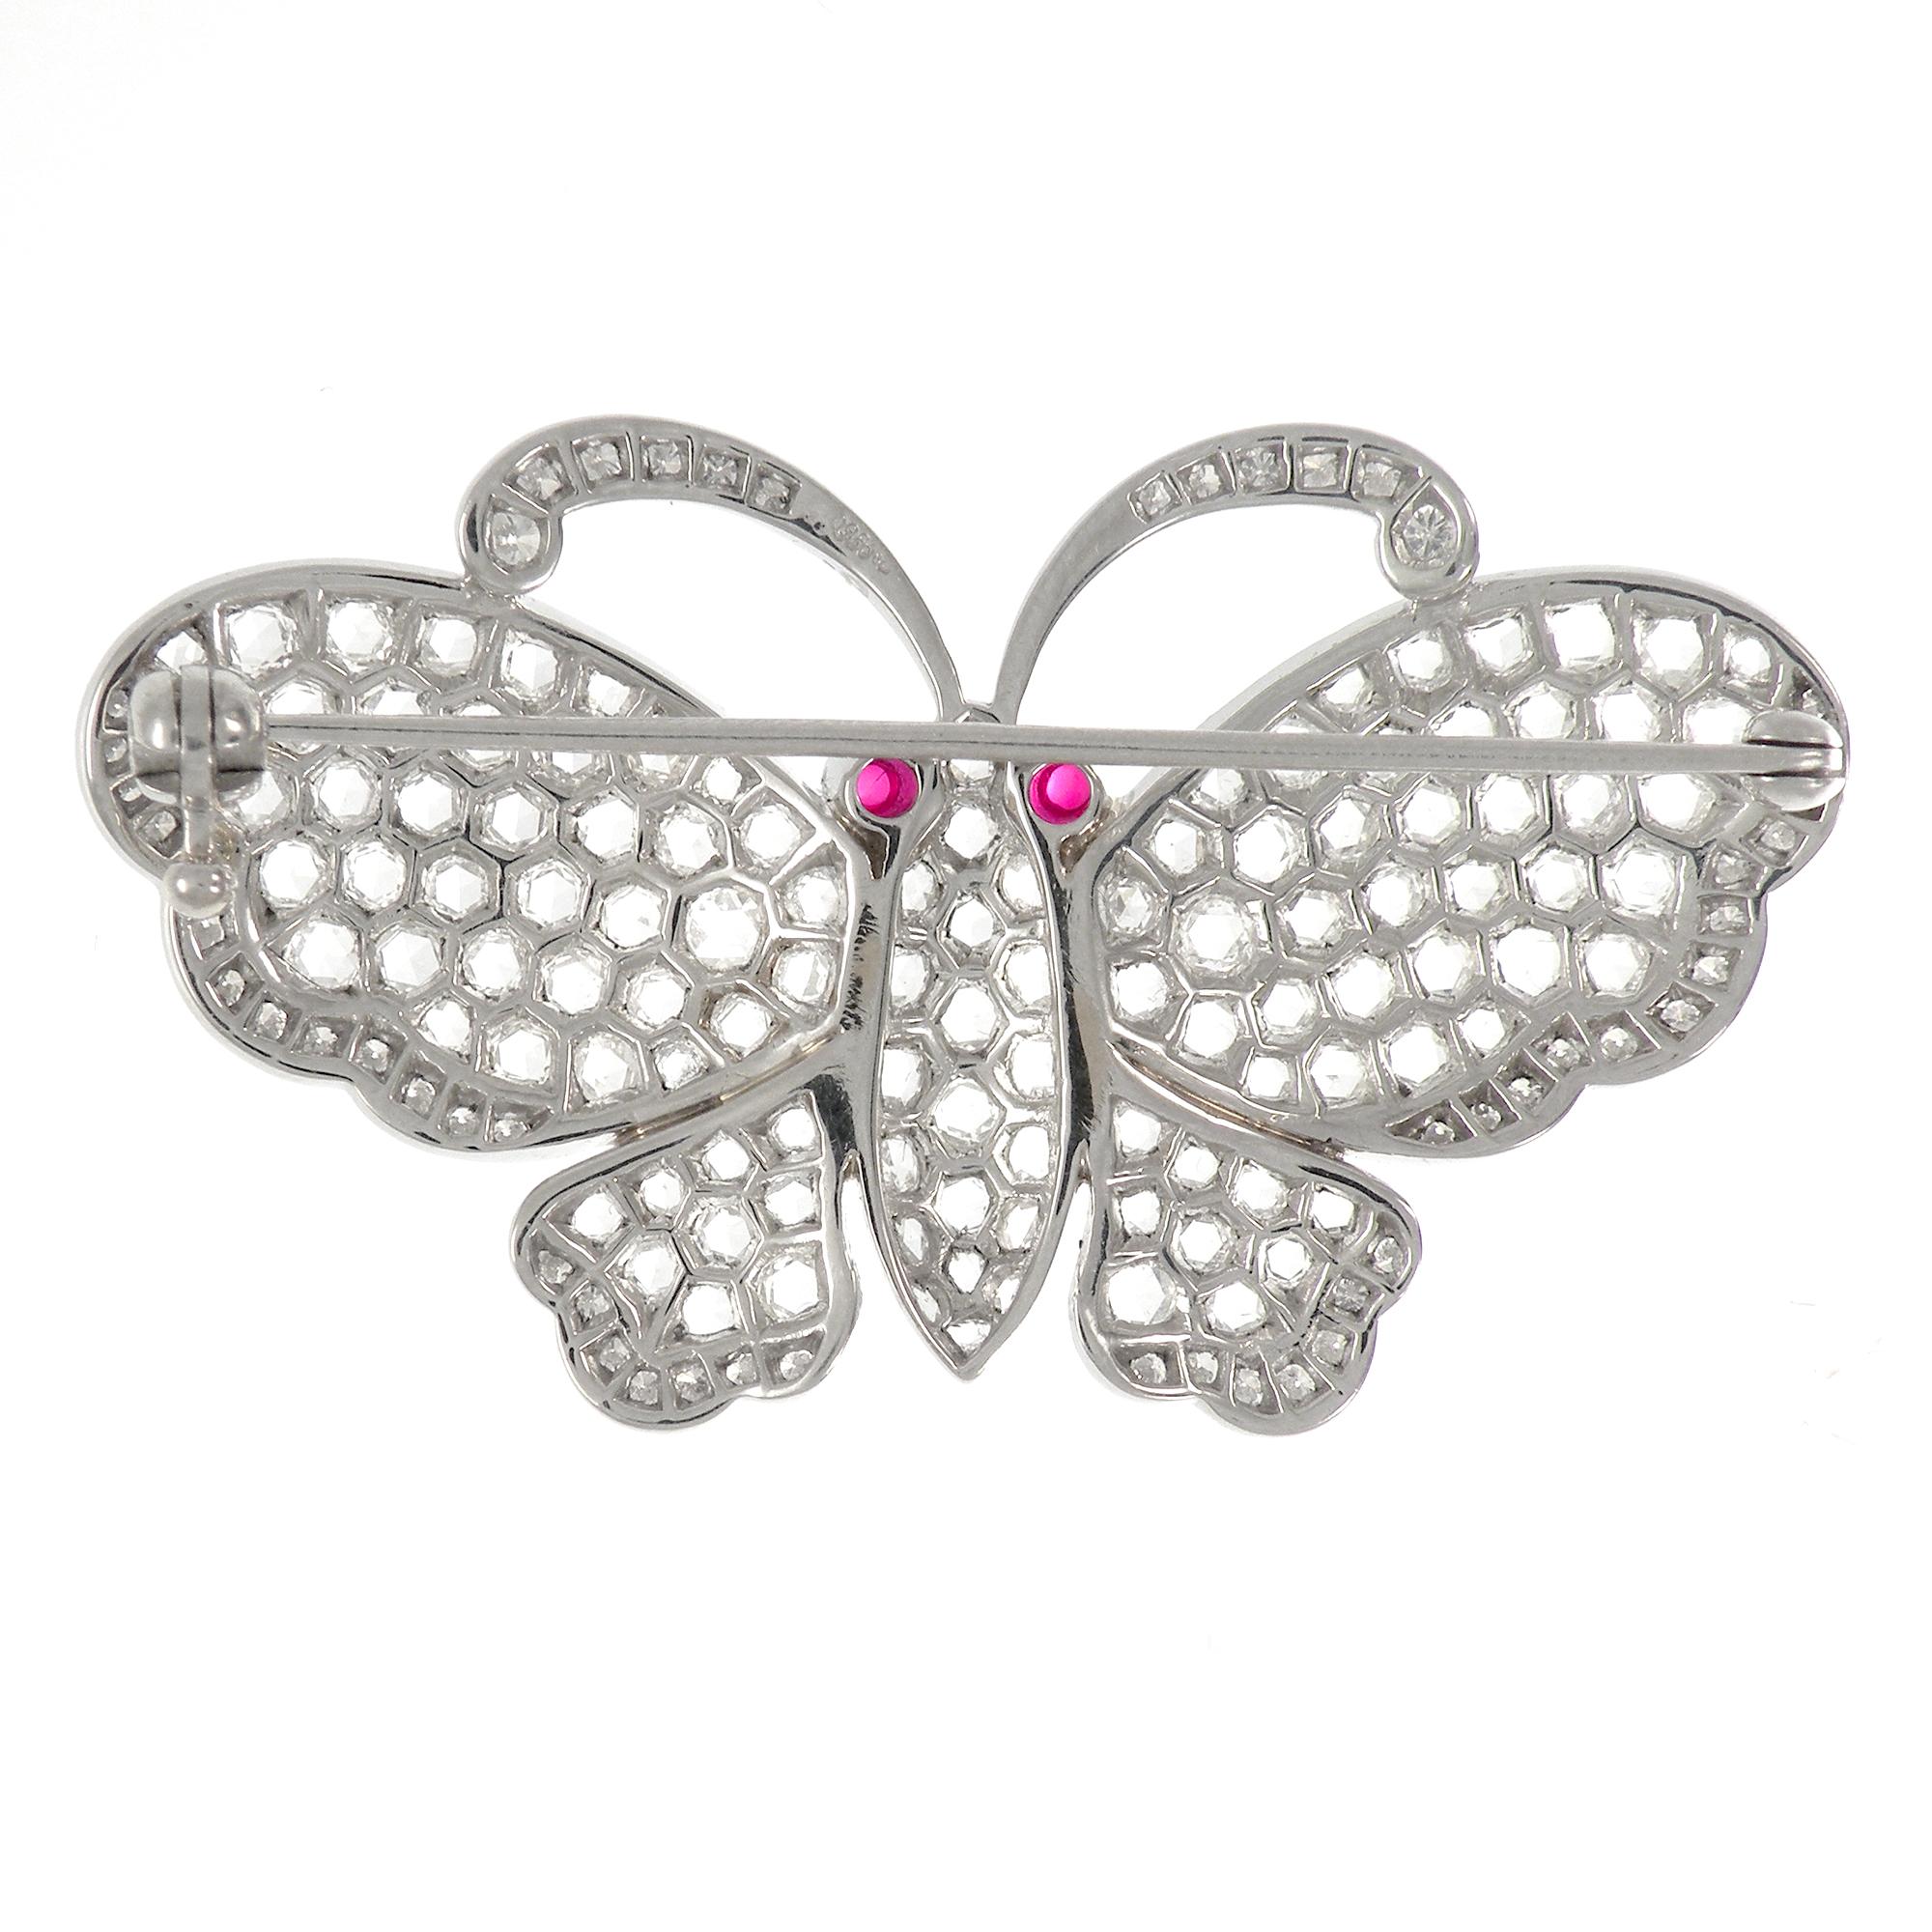 
This Beautiful Rose Cut Diamond Butterfly brooch is handcrafted in Platinum, features rose cut diamonds of 2.68 carats, full cut diamonds of 0.44 carats and 2 small cabochon rubies of 0.15 carats on the eyes.